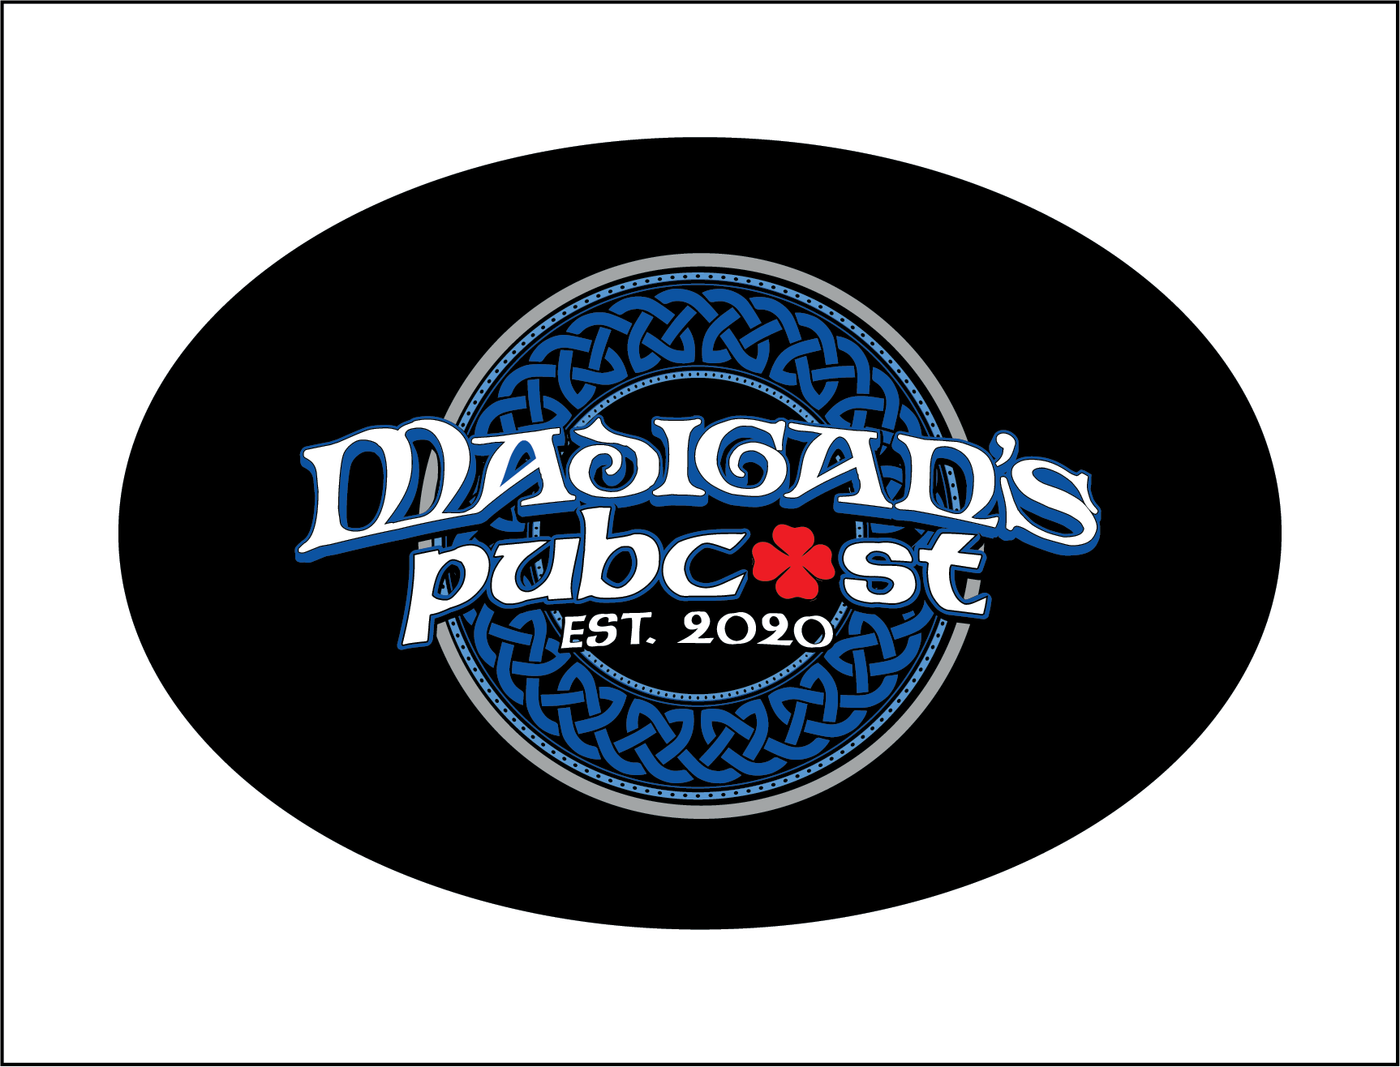 Madigan’s Pubcast Official Sticker